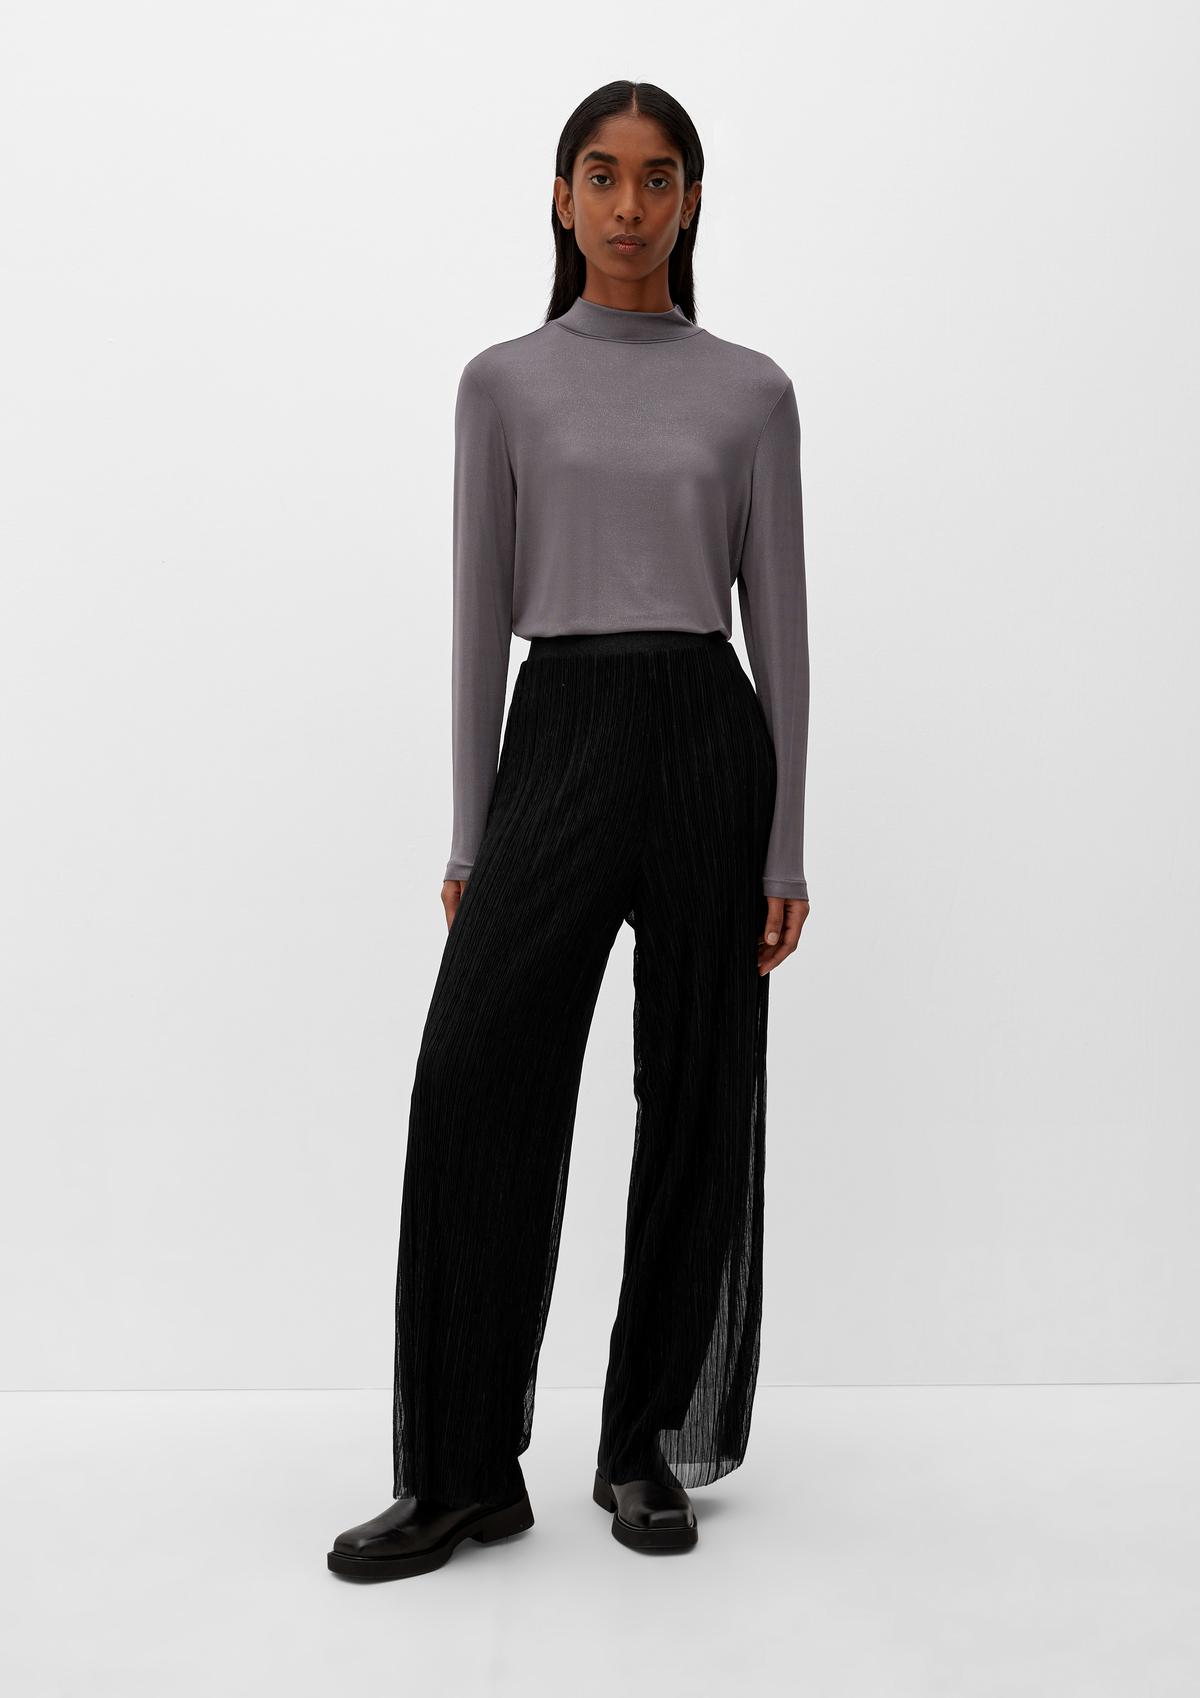 - fit: glitter Regular black yarn with trousers